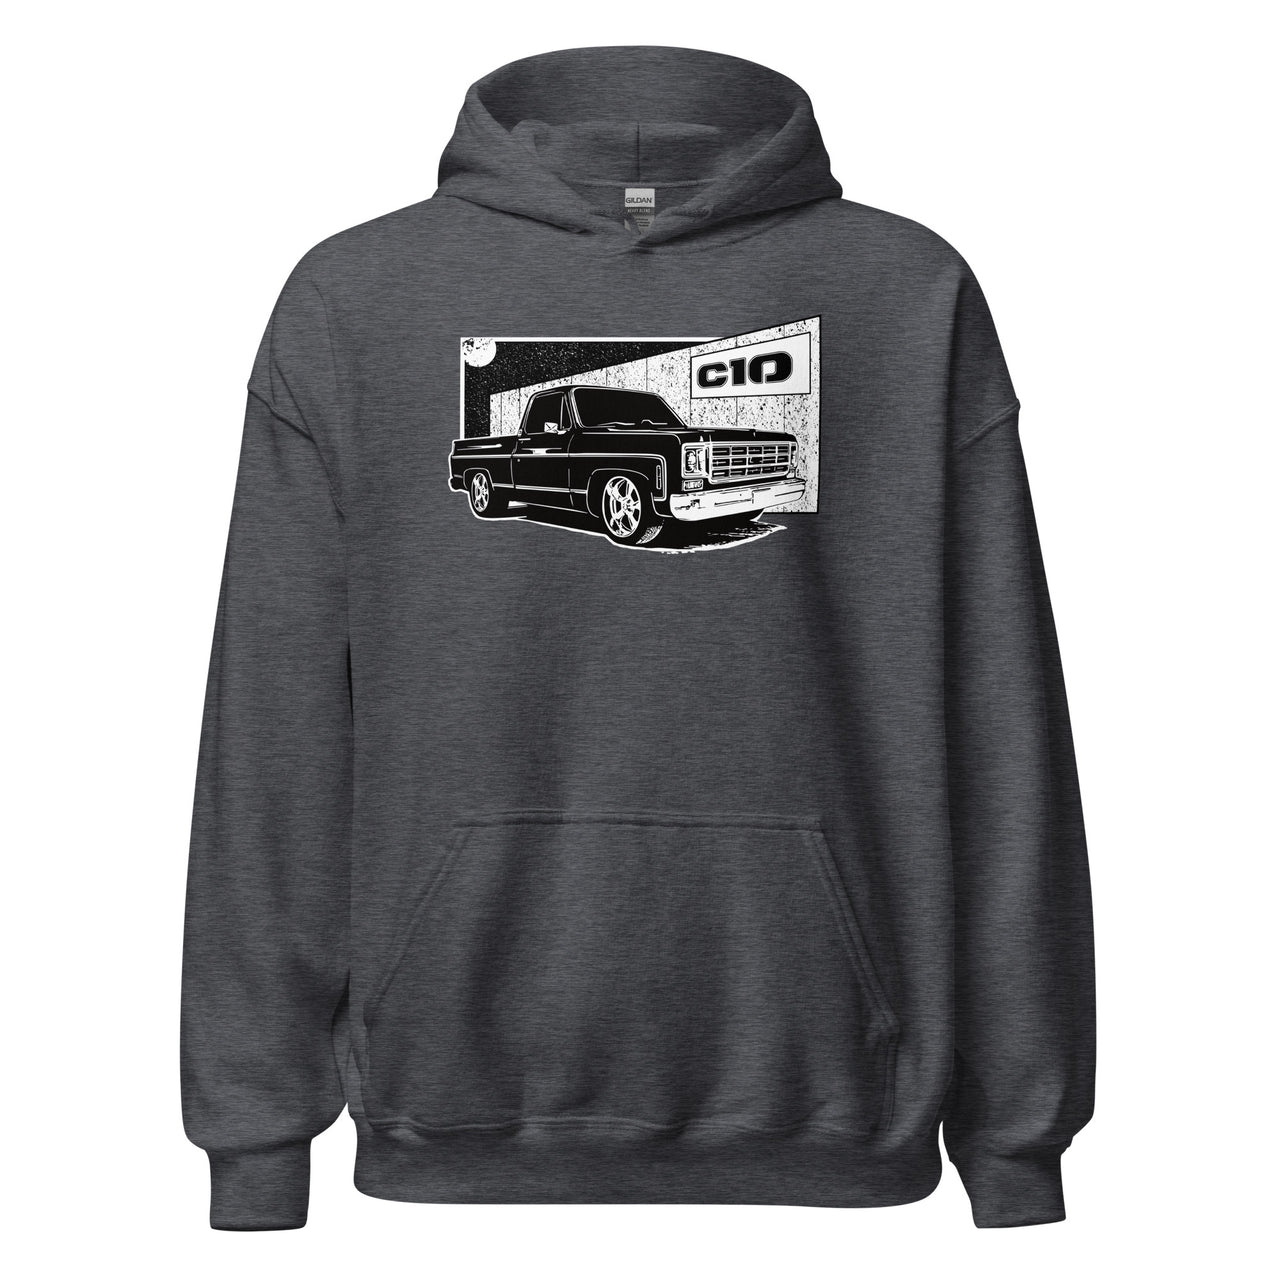 Square Body C10 Hoodie in grey